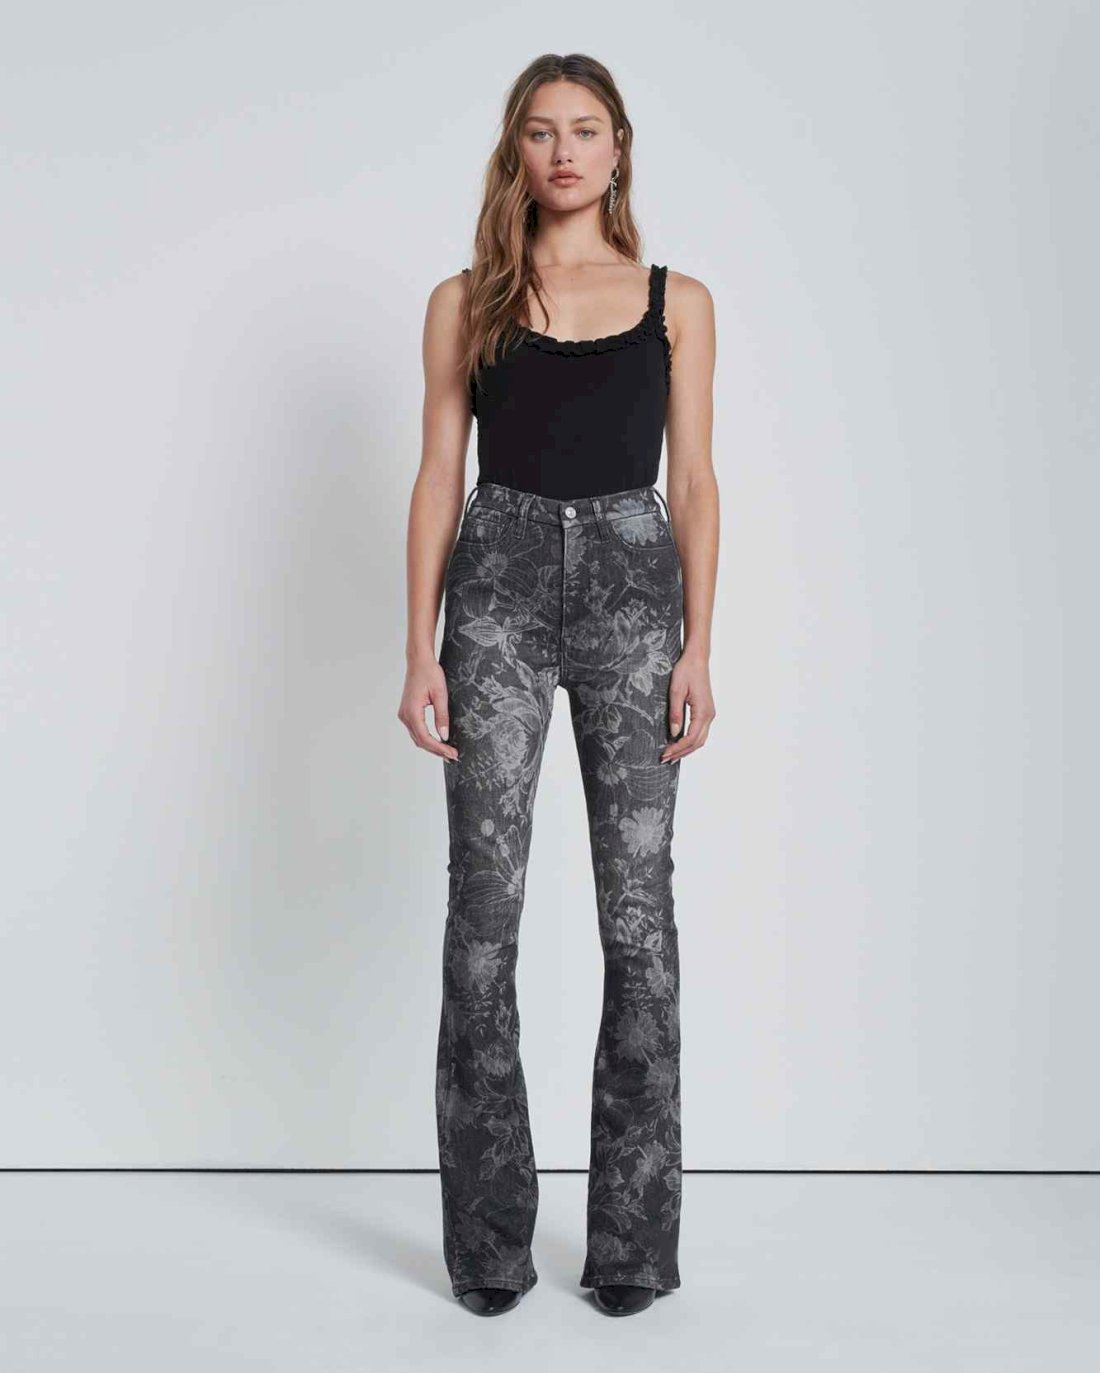 Ultra High-Rise Skinny Boot in Fairytale Floral Black | 7 For All Mankind